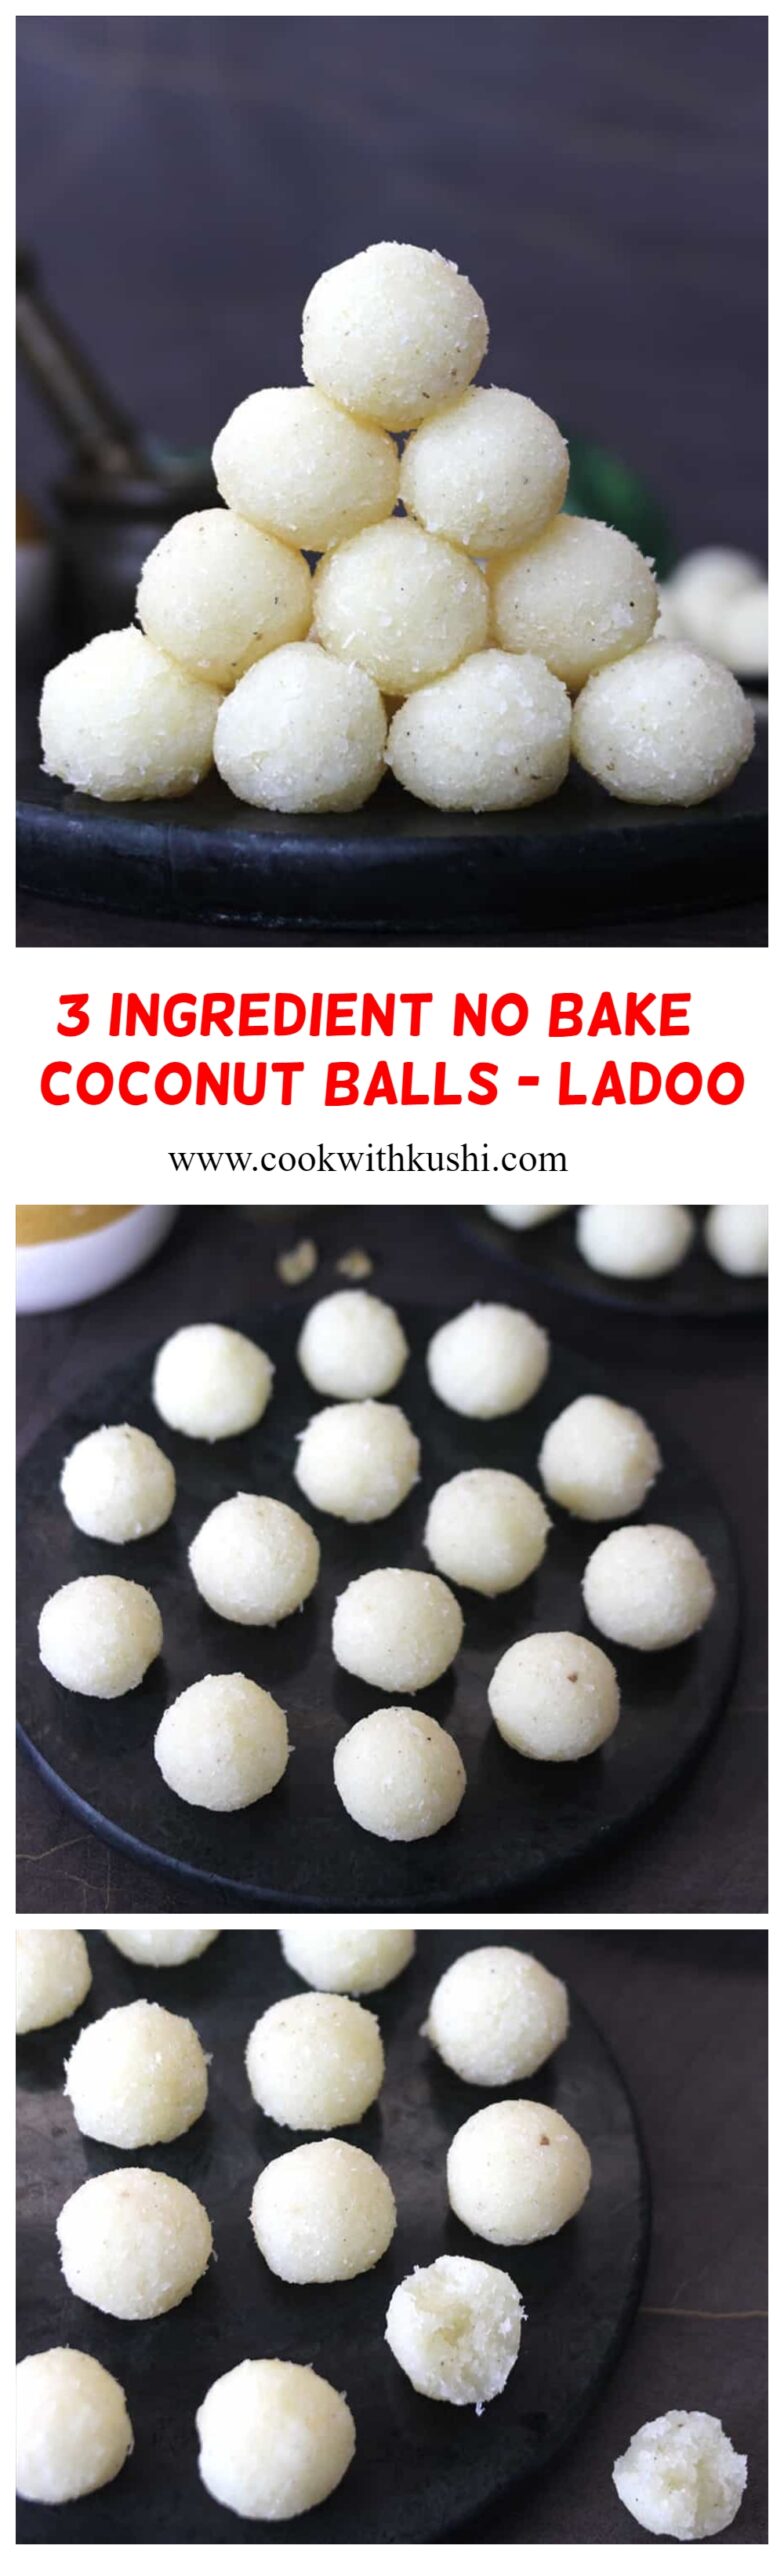 How to make quick, easy instant ladoo, laddu with coconut (nariyal)